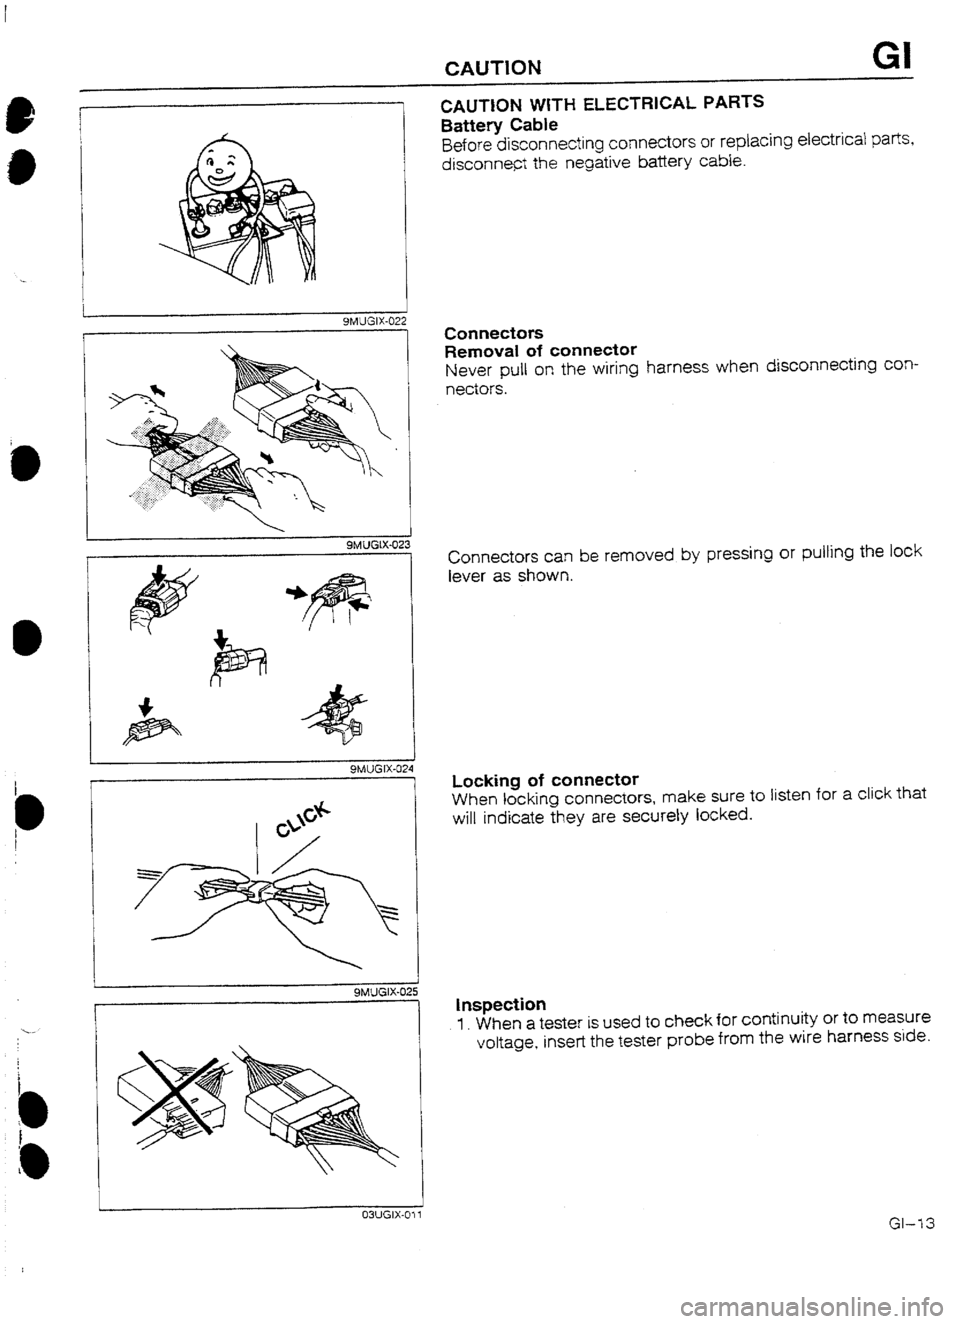 MAZDA 232 1990  Workshop Manual Suplement CAUTION GI 
i I 9MUGIX-022 
 
9MUGIX-02: 
9MUGIX-02 
CAUTlON WITH ELECTRICAL PARTS 
Battery Cable 
Before disconnecting connectors or replacing electrical parts, 
disconne@ the negative battery cable.